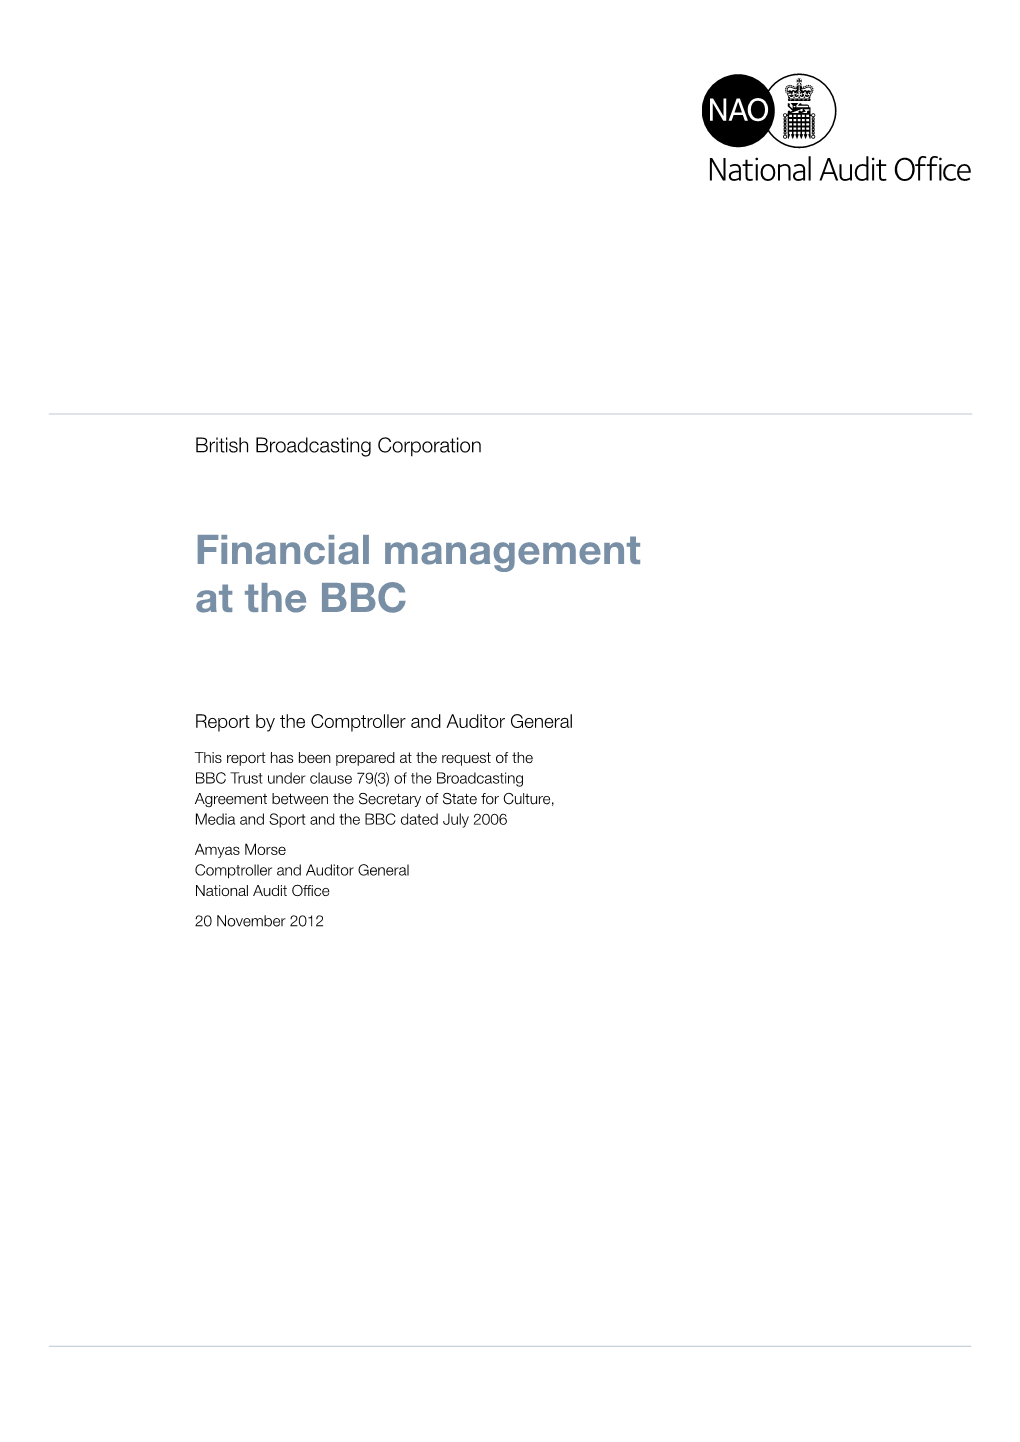 Financial Management at the BBC